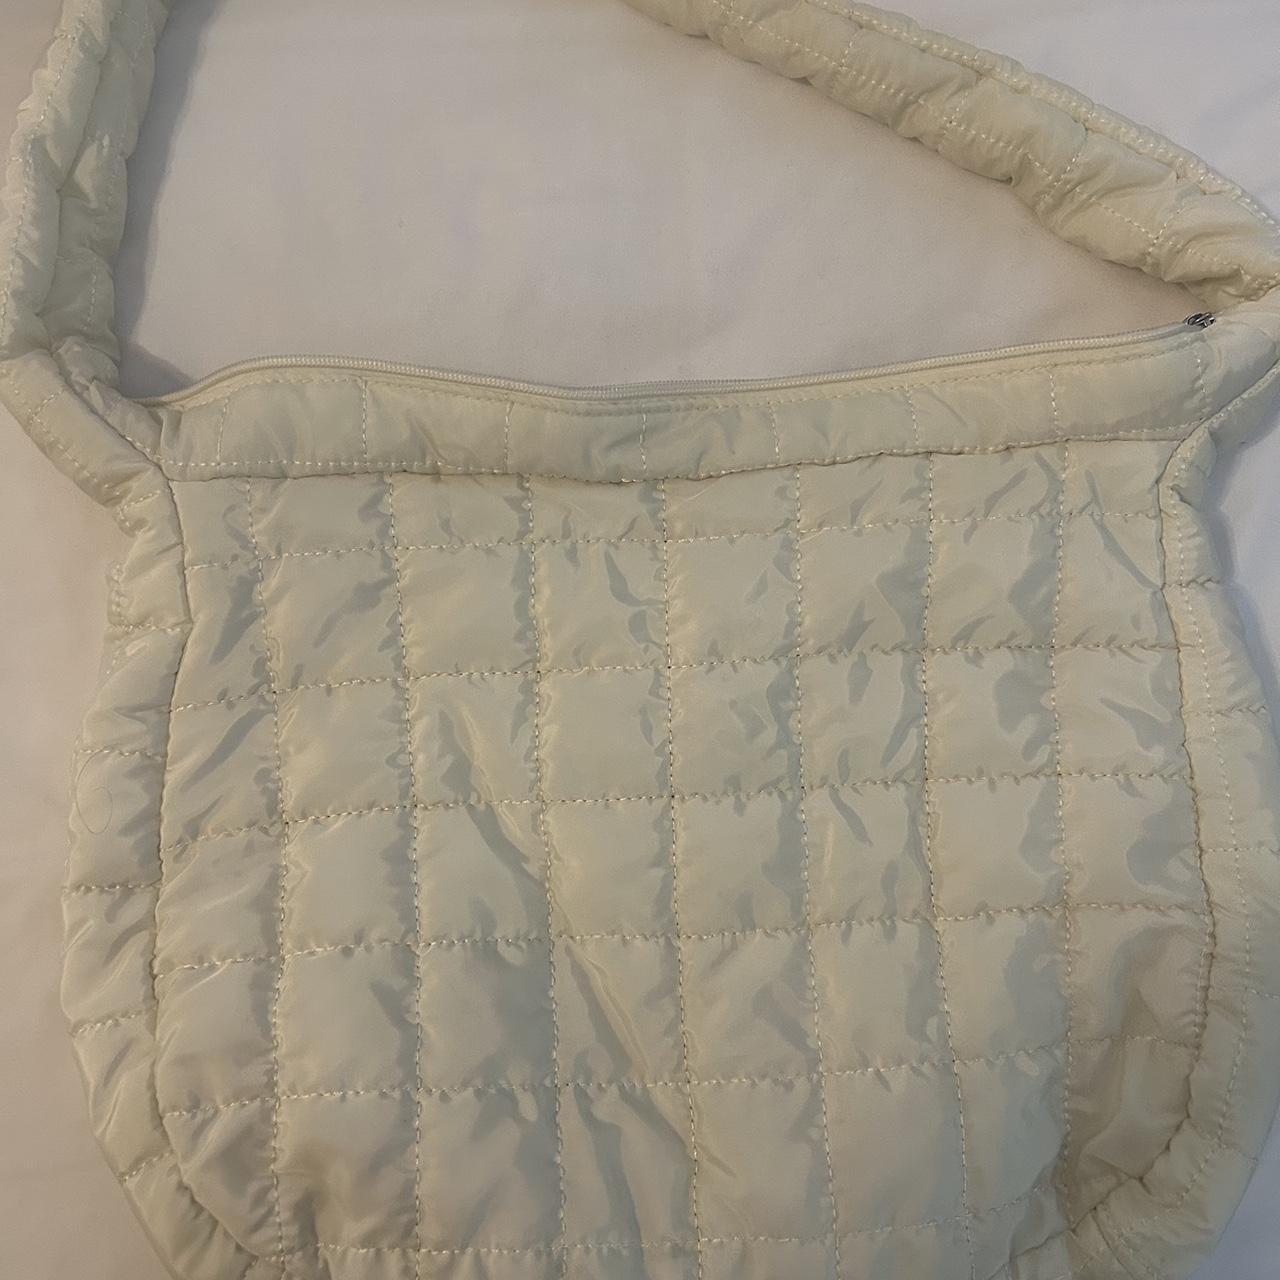 Pillow bag in cream. No rips or tears. Small marks... - Depop